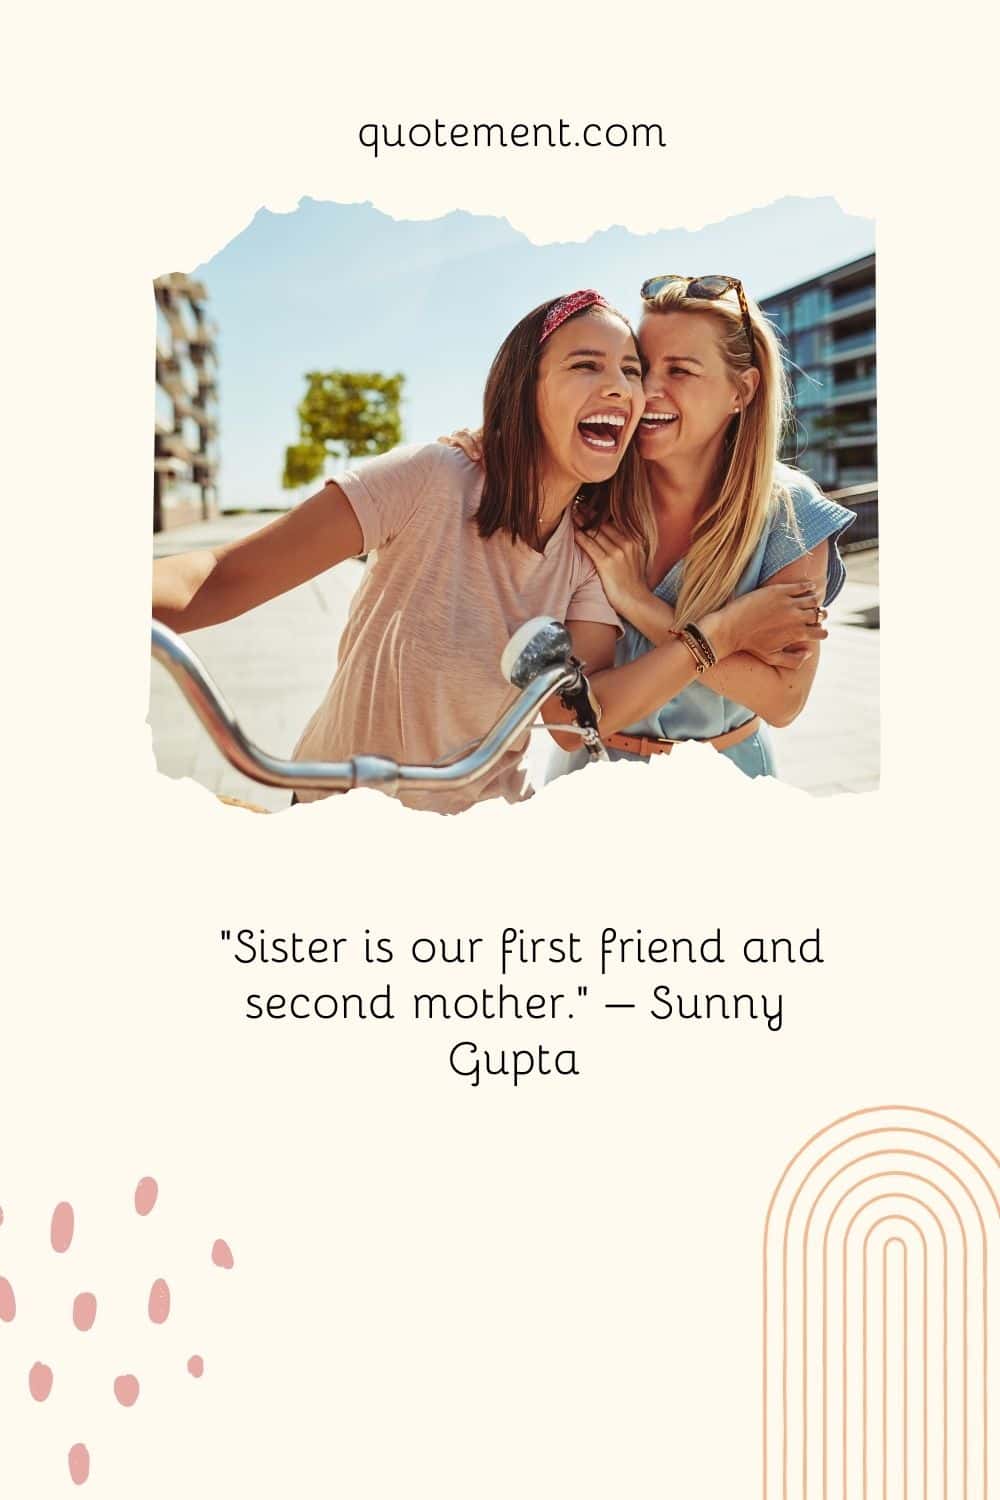 Sister is our first friend and second mother. – Sunny Gupta